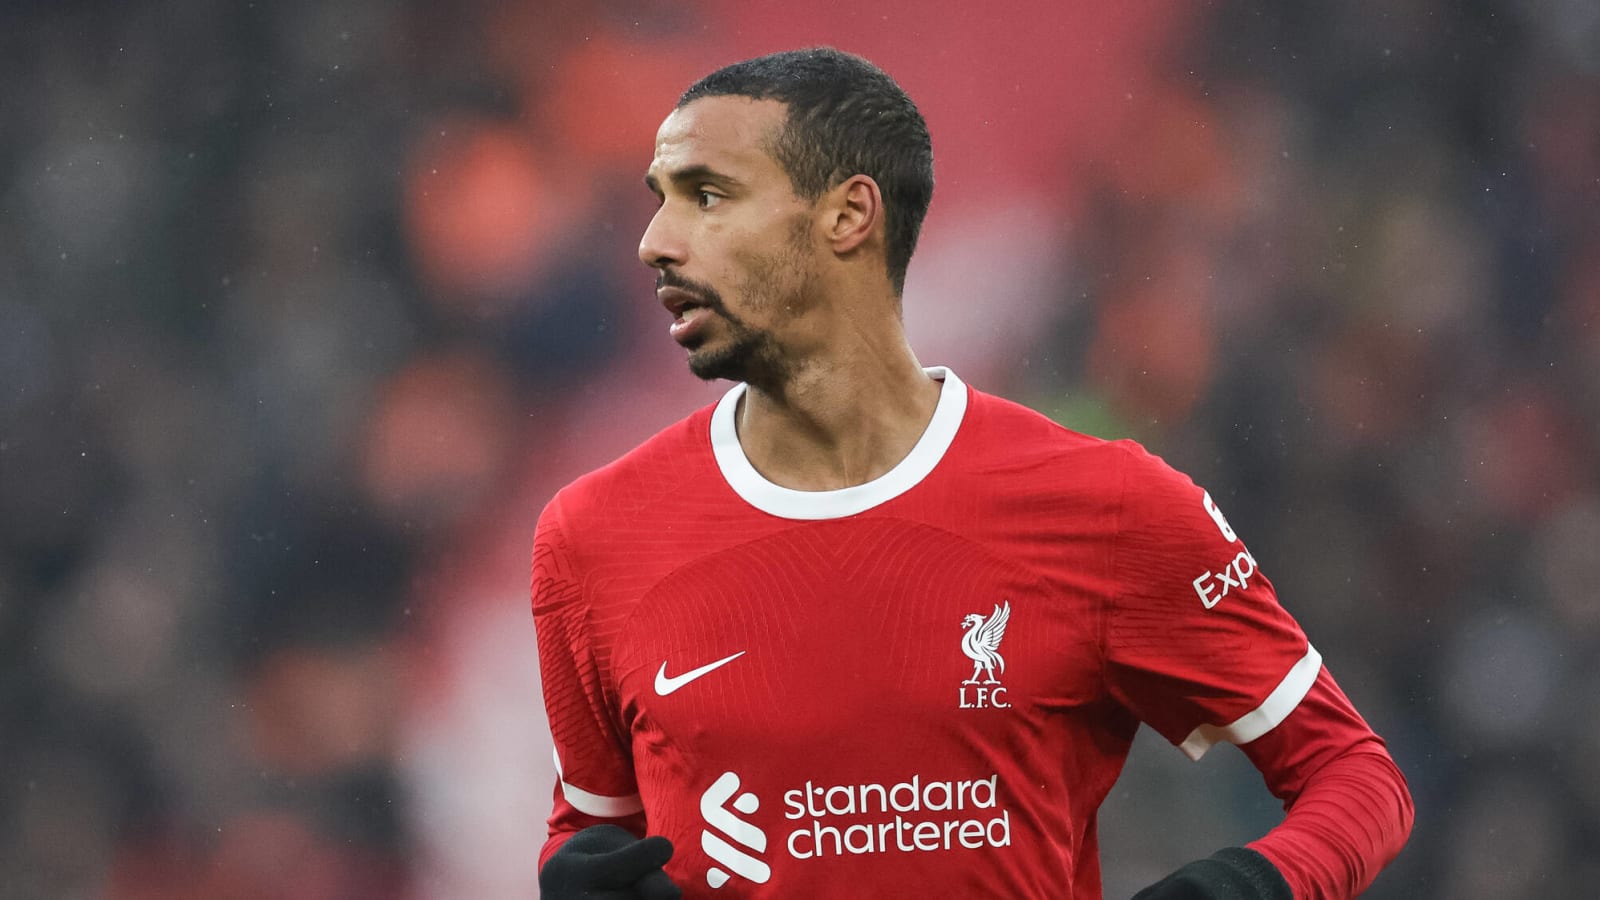 January solutions Liverpool could explore as Matip injury forces rethink